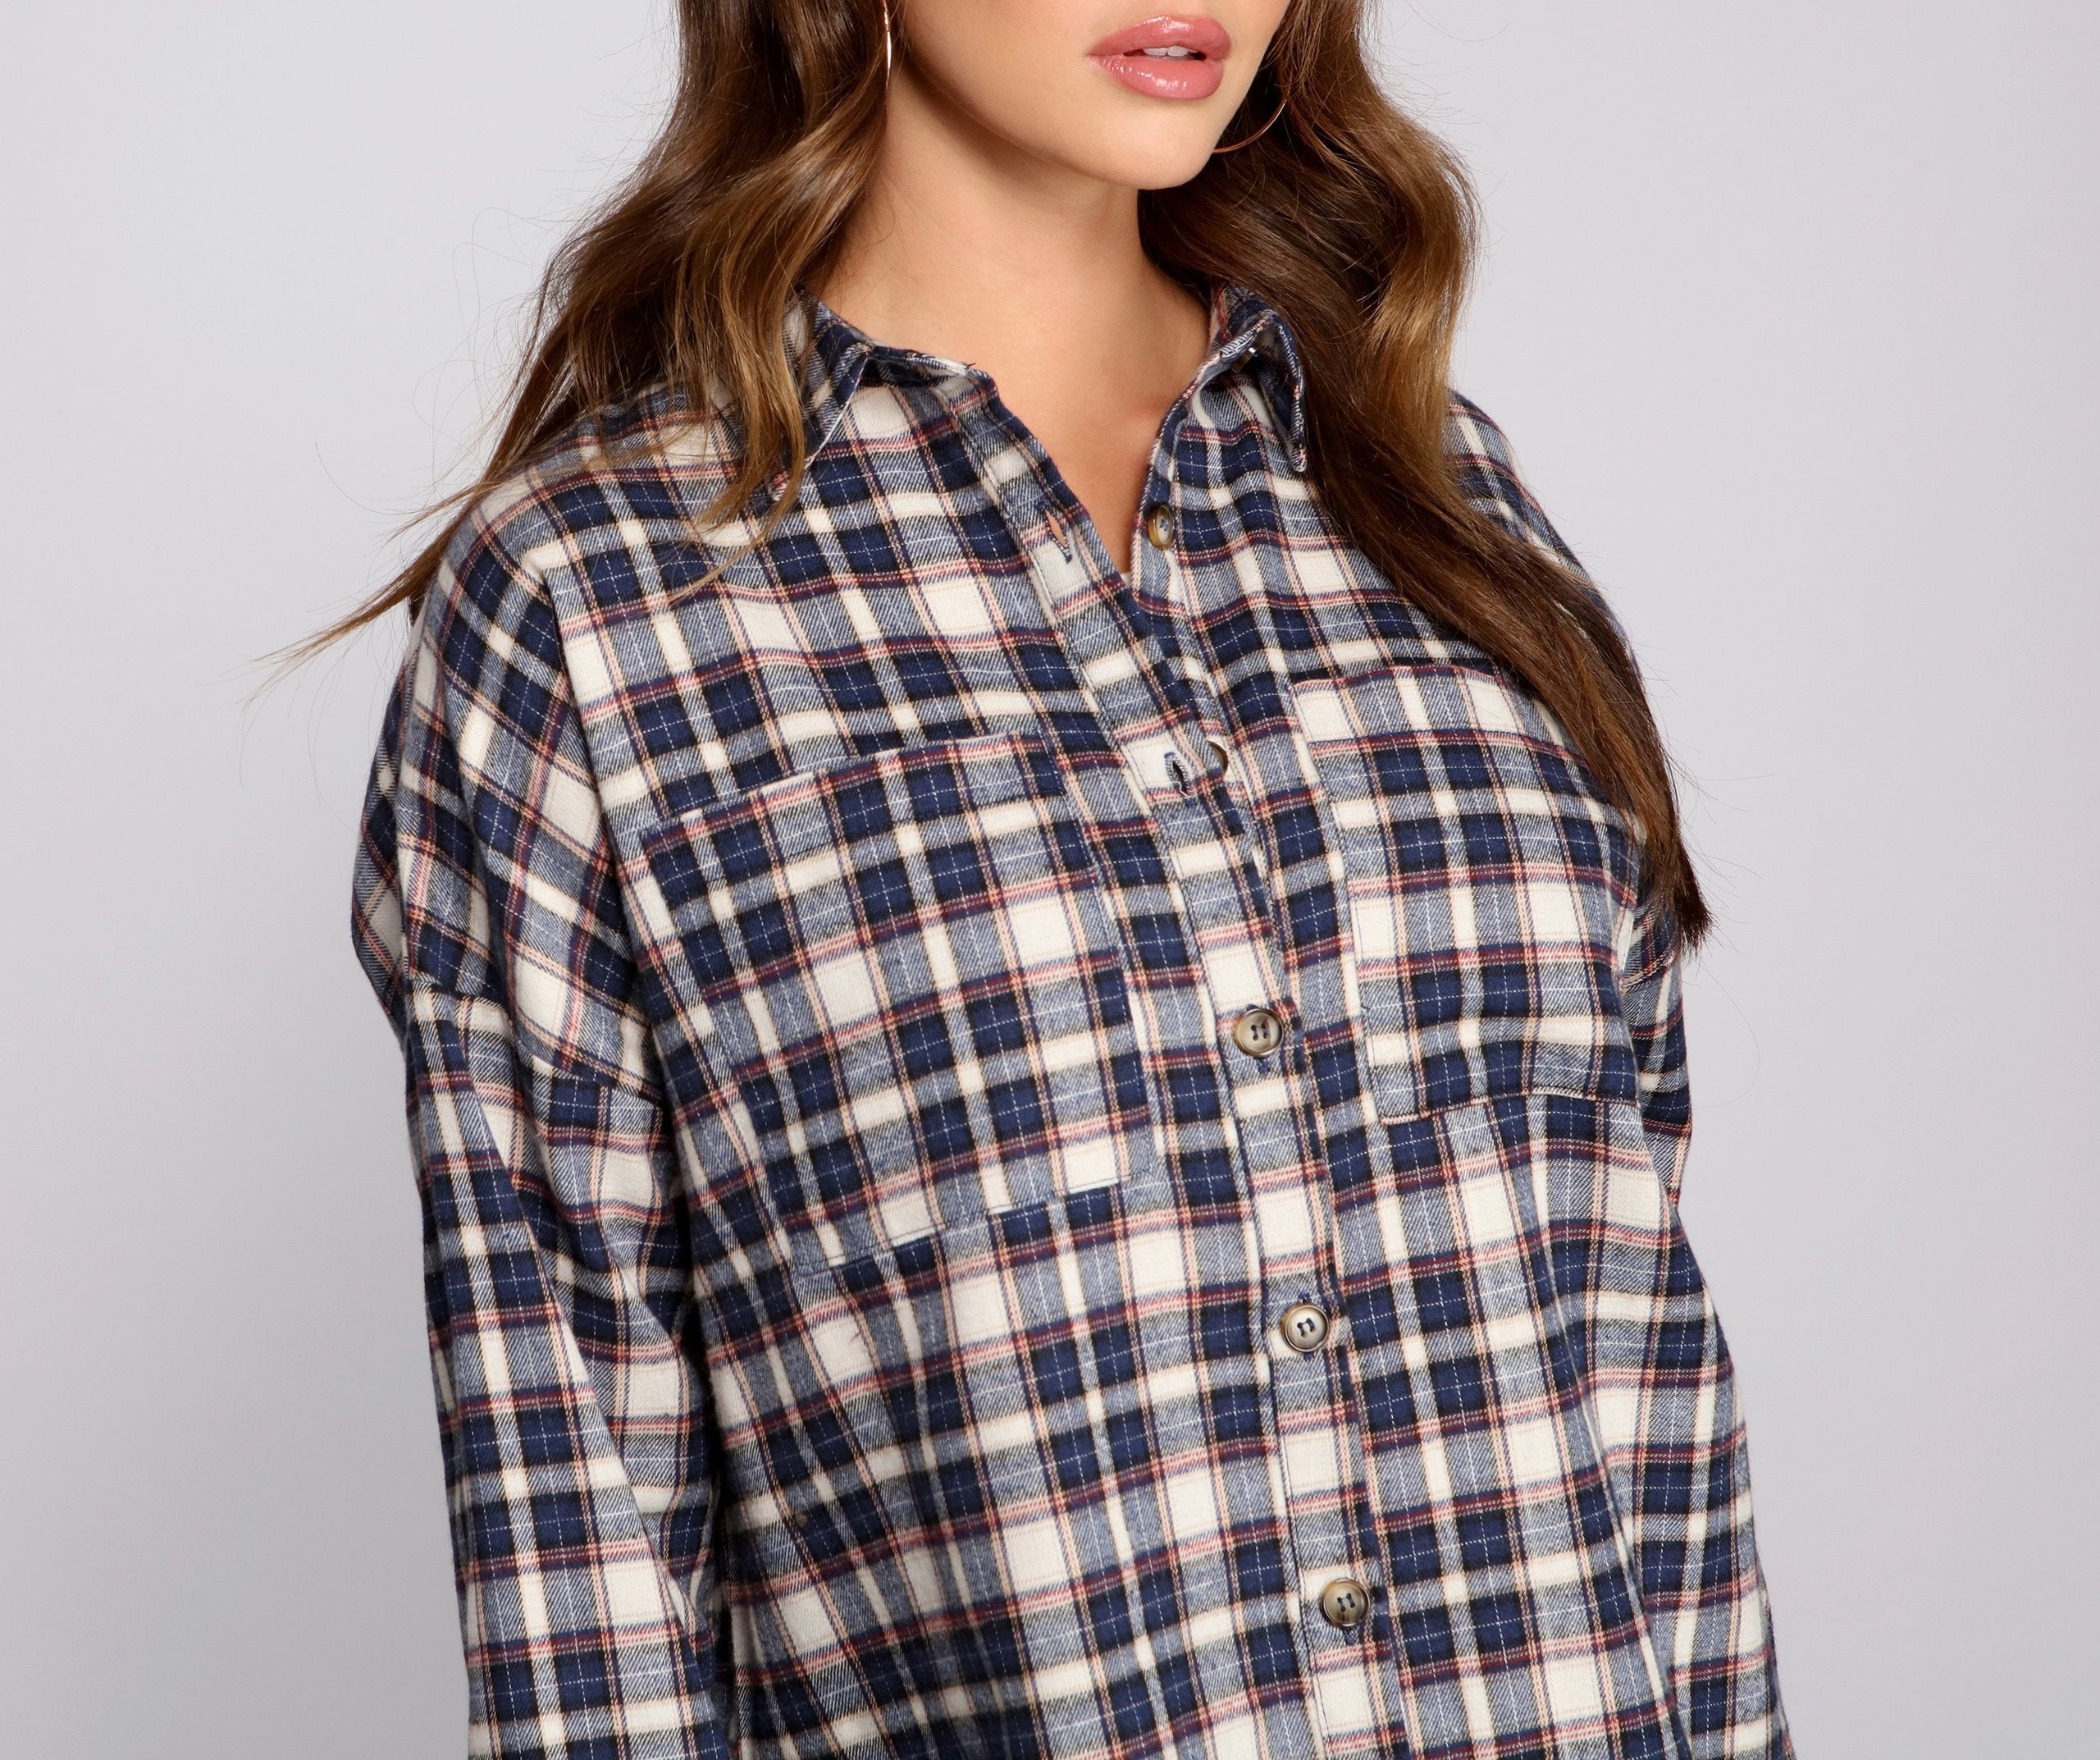 Flannel Mood Button Down Top - Lady Occasions